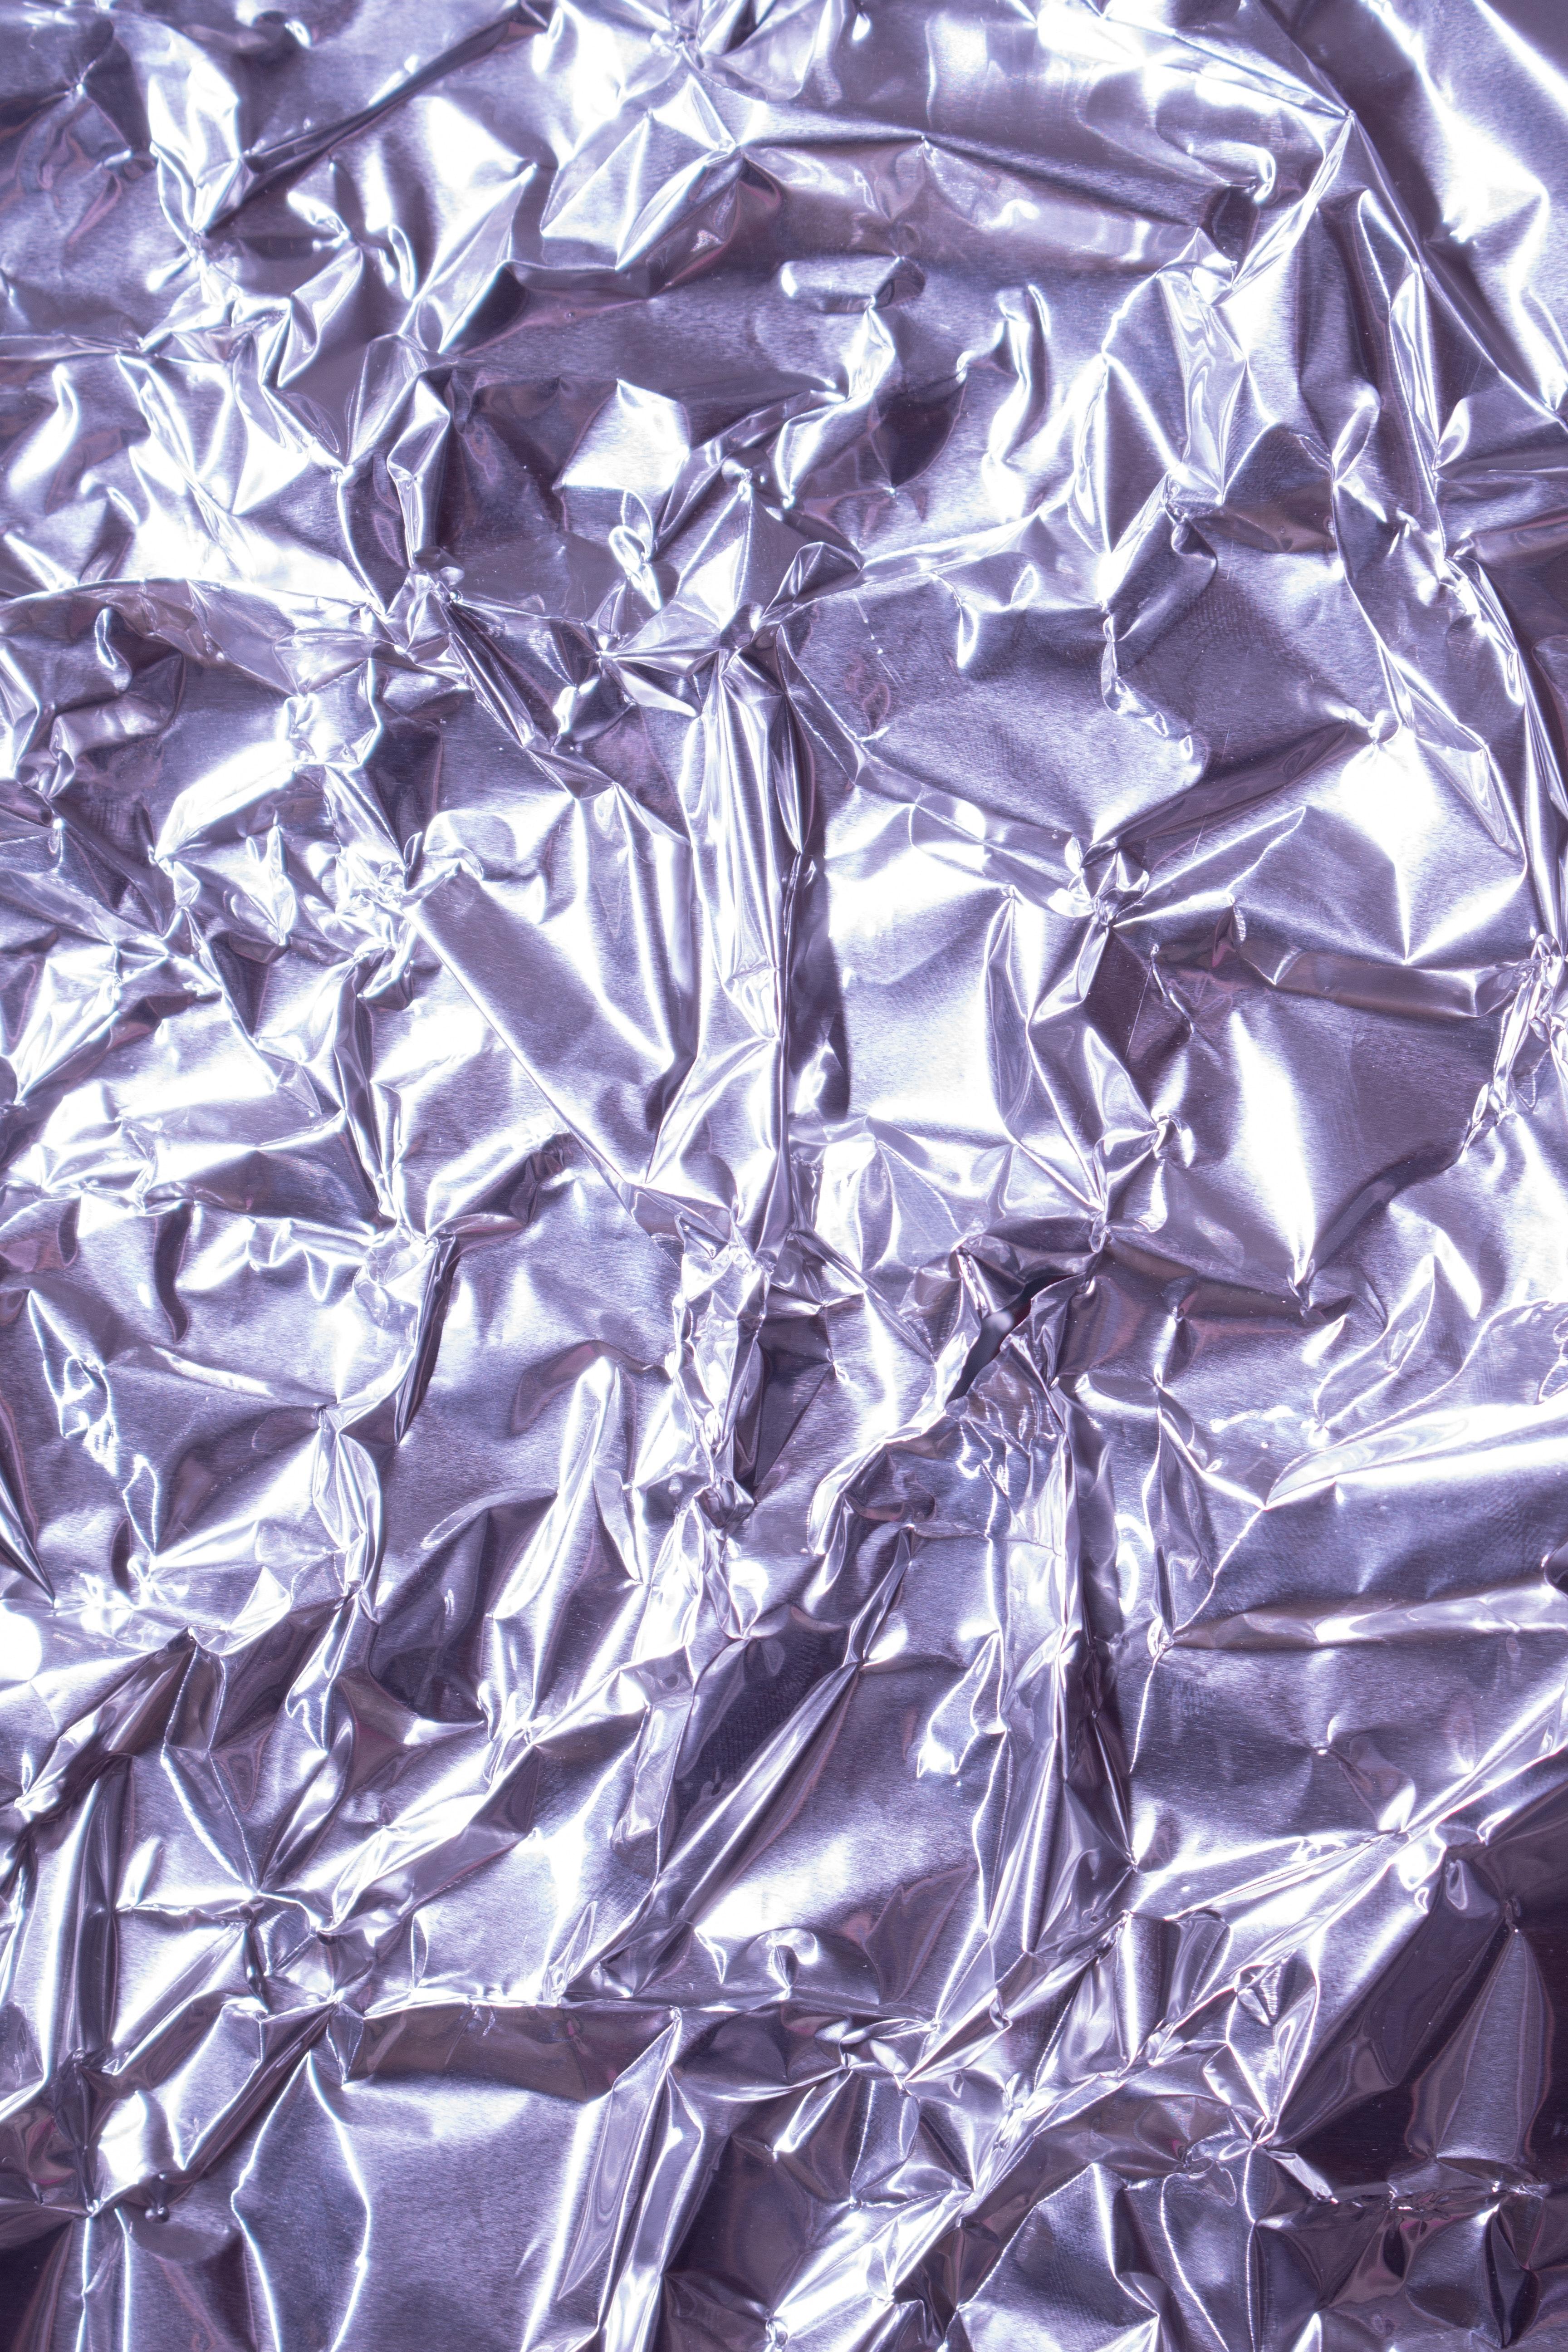  Does Aluminum Foil Stop Store Alarms From Going Off 